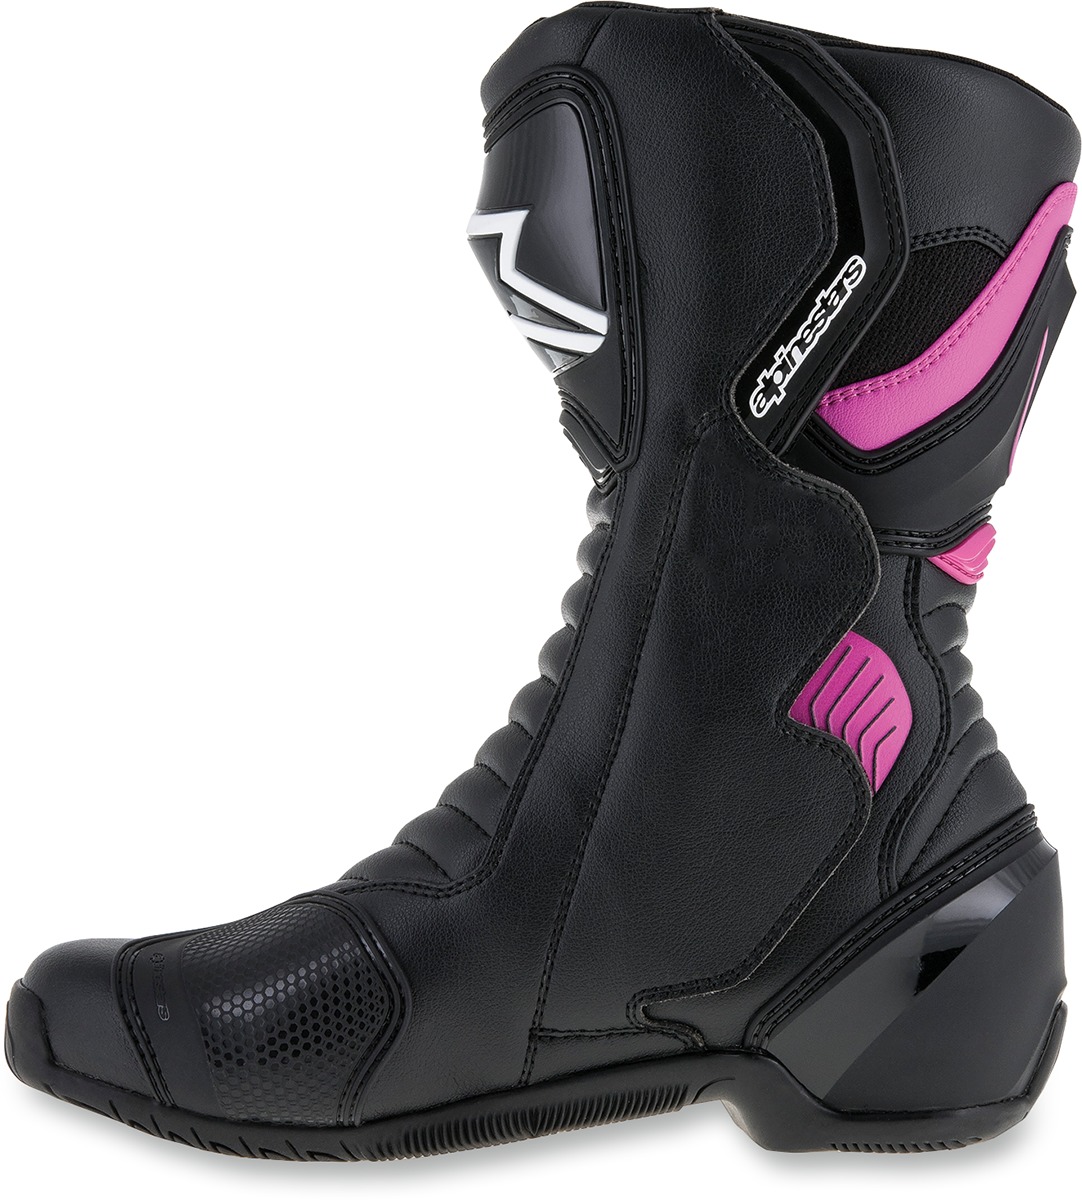 Women's SMX6 Vented Street Riding Boots Black/Pink/White US 7 - Click Image to Close